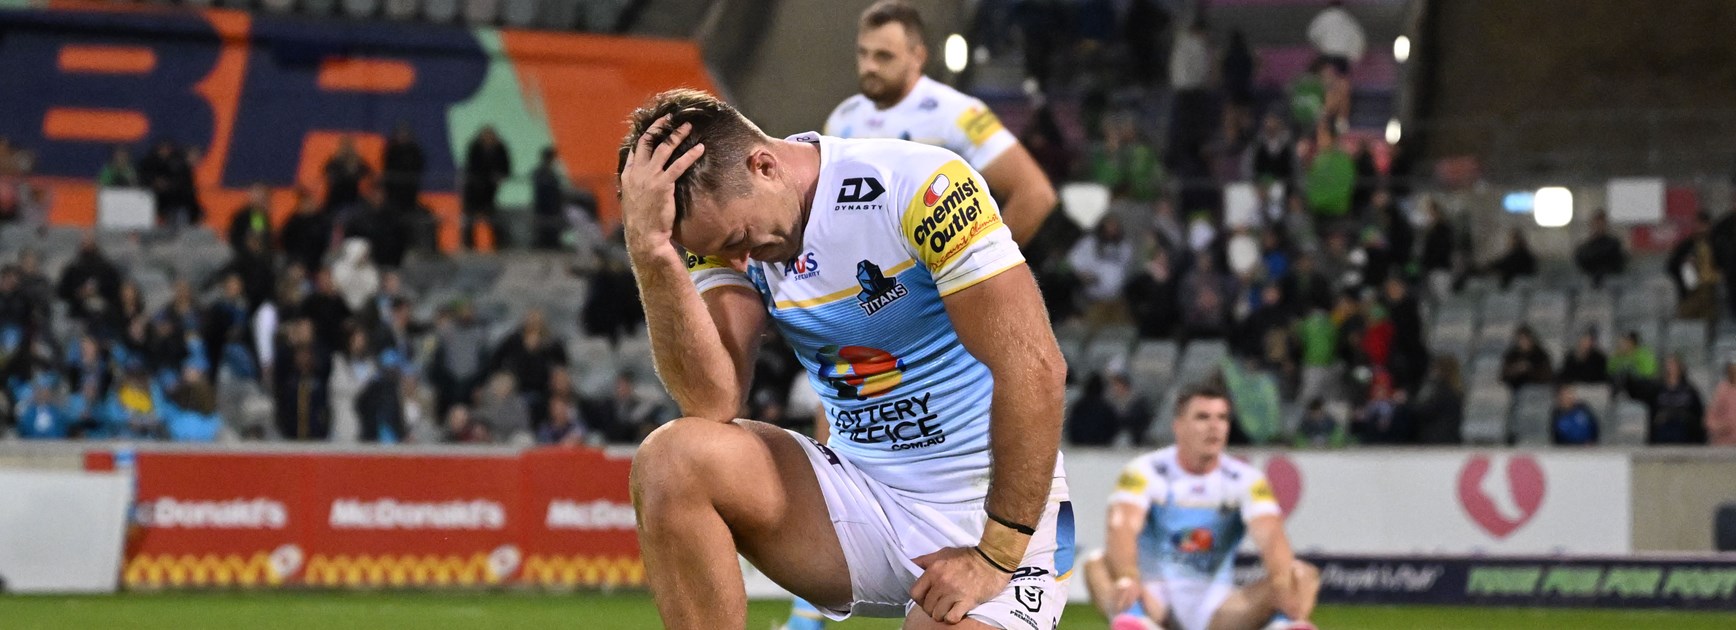 Sam Verrills shows frustration after their controversial golden-point finish in Canberra.